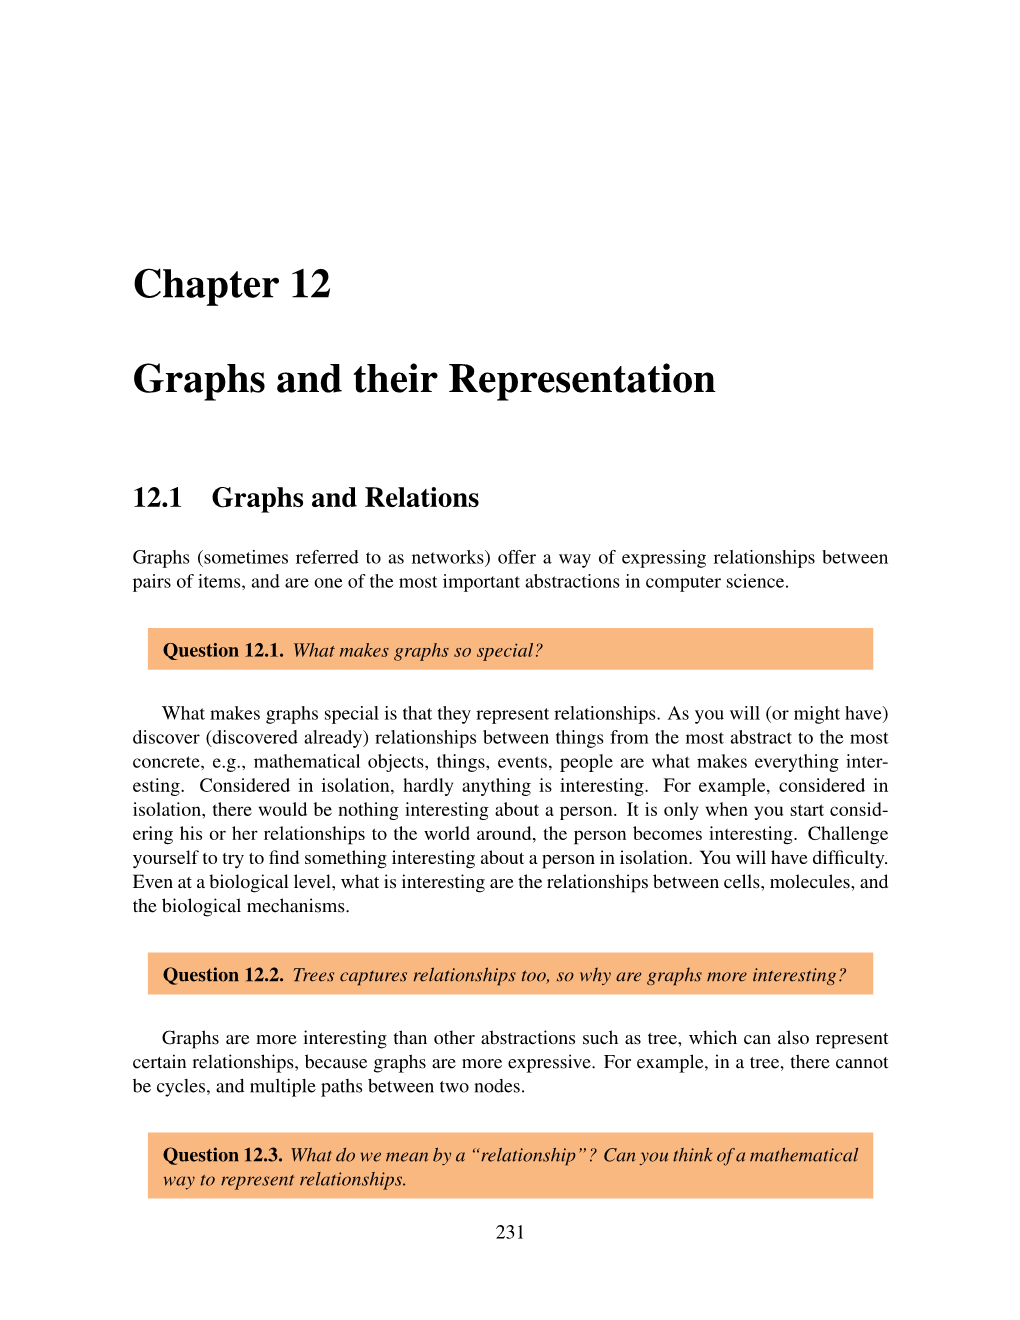 Chapter 12 Graphs and Their Representation